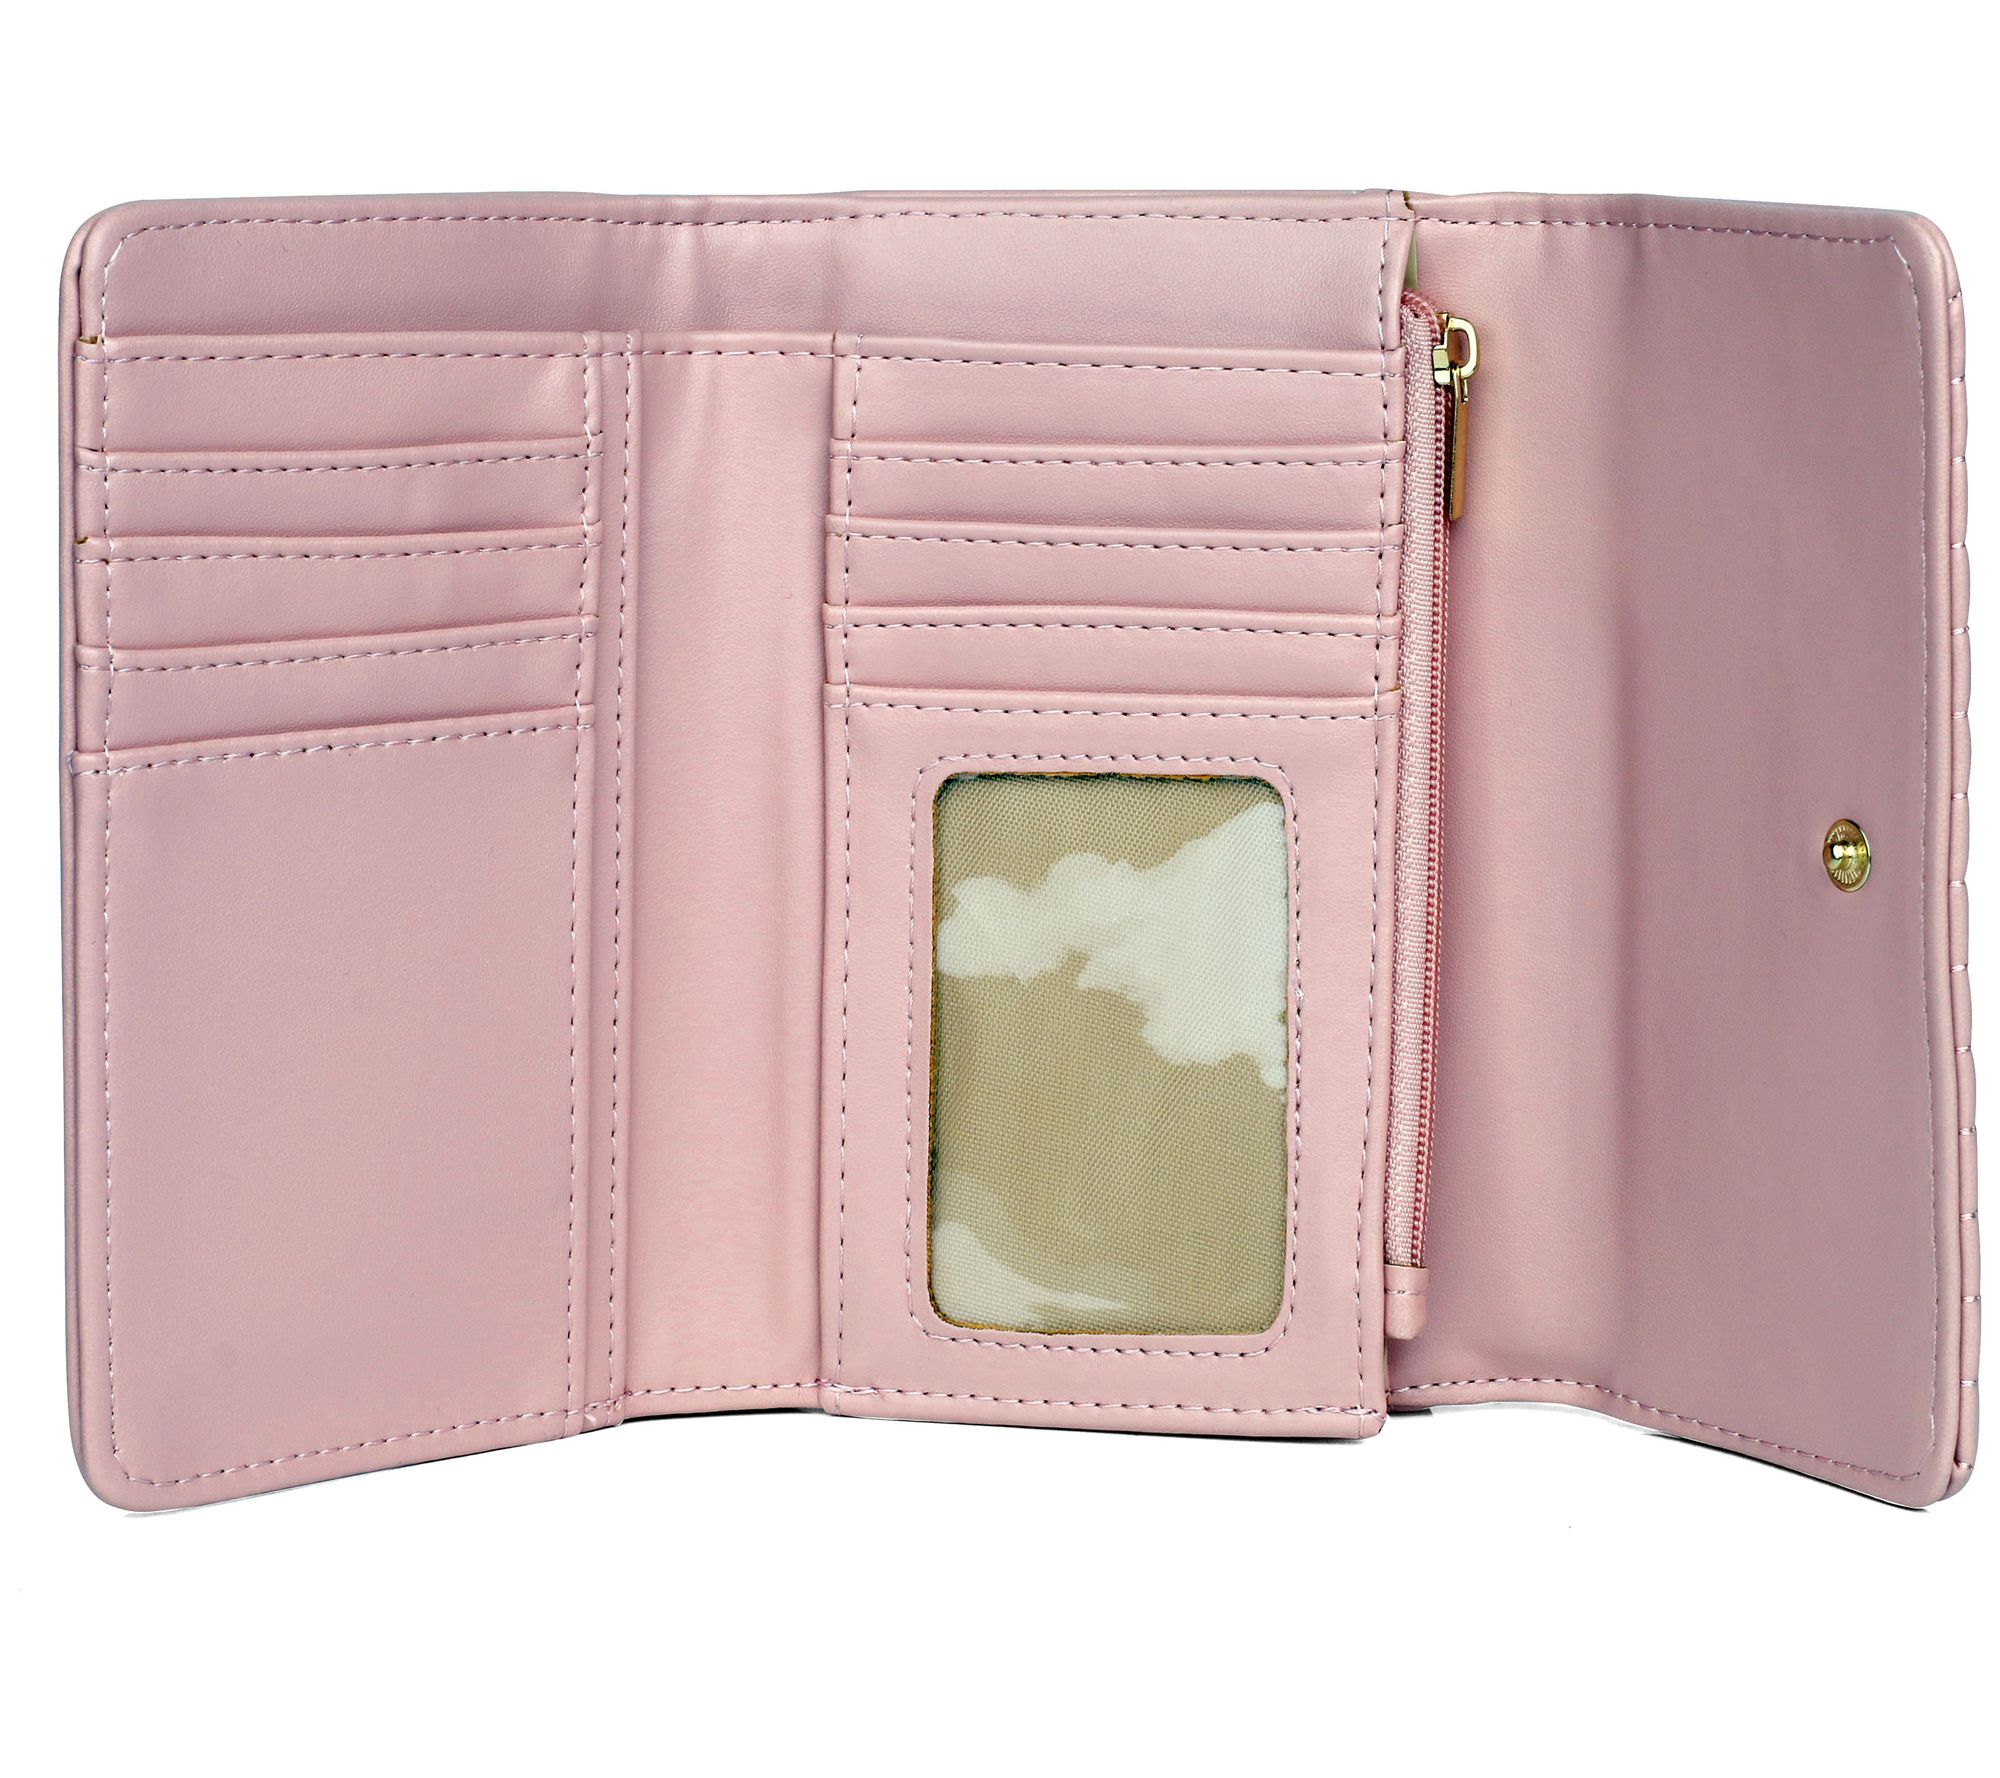 Julia Buxton Channel Quilted Vegan Leather Midized Tri-fold - QVC.com